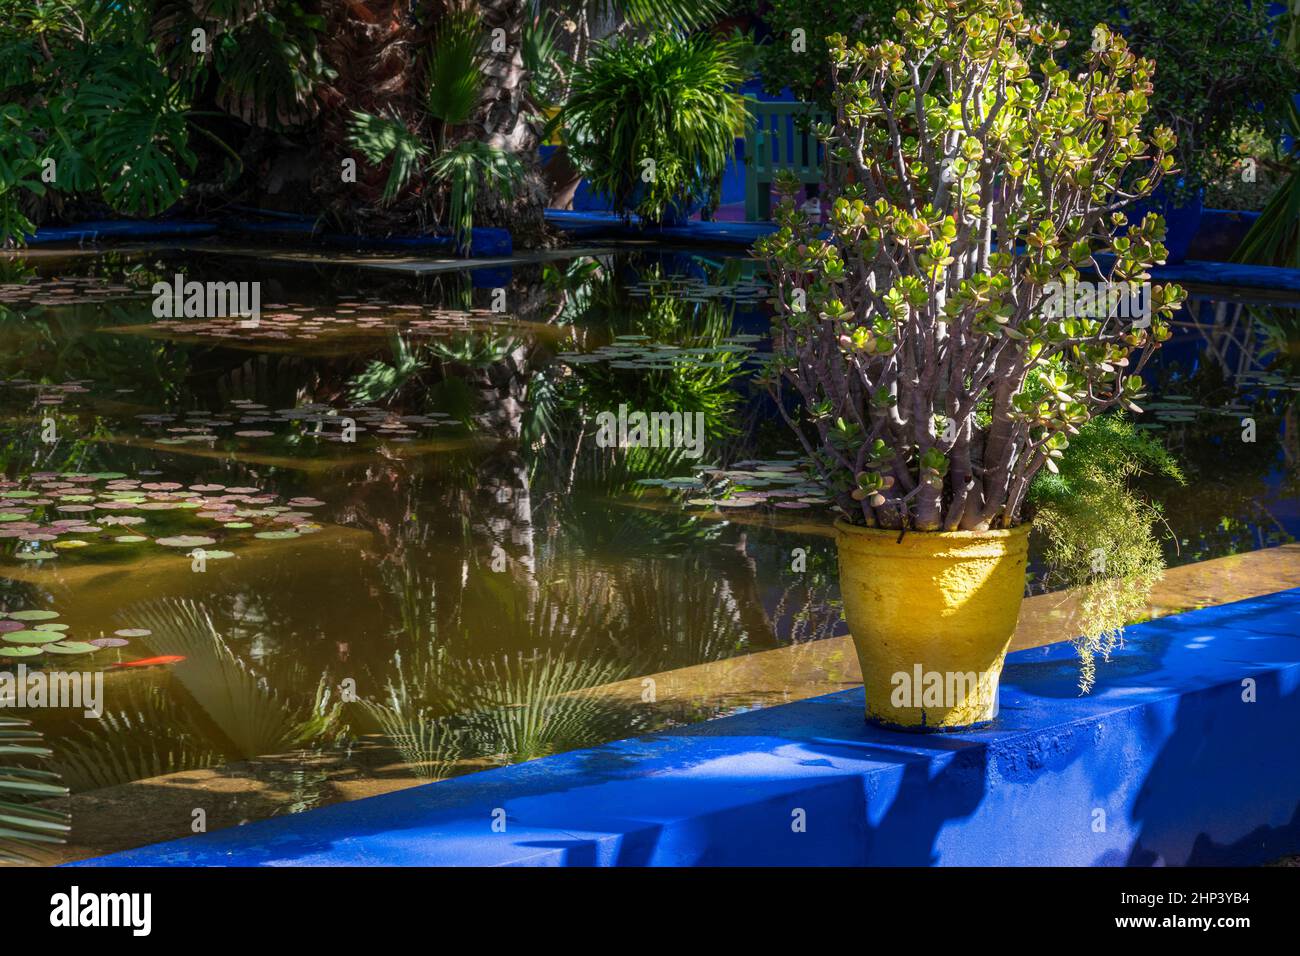 MOROCCO MARRAKESH THE MAJORELLE GARDEN حديقة ماجوريل POOL WITH COBALT BLUE WALLS AND BRIGHT YELLOW POT Stock Photo